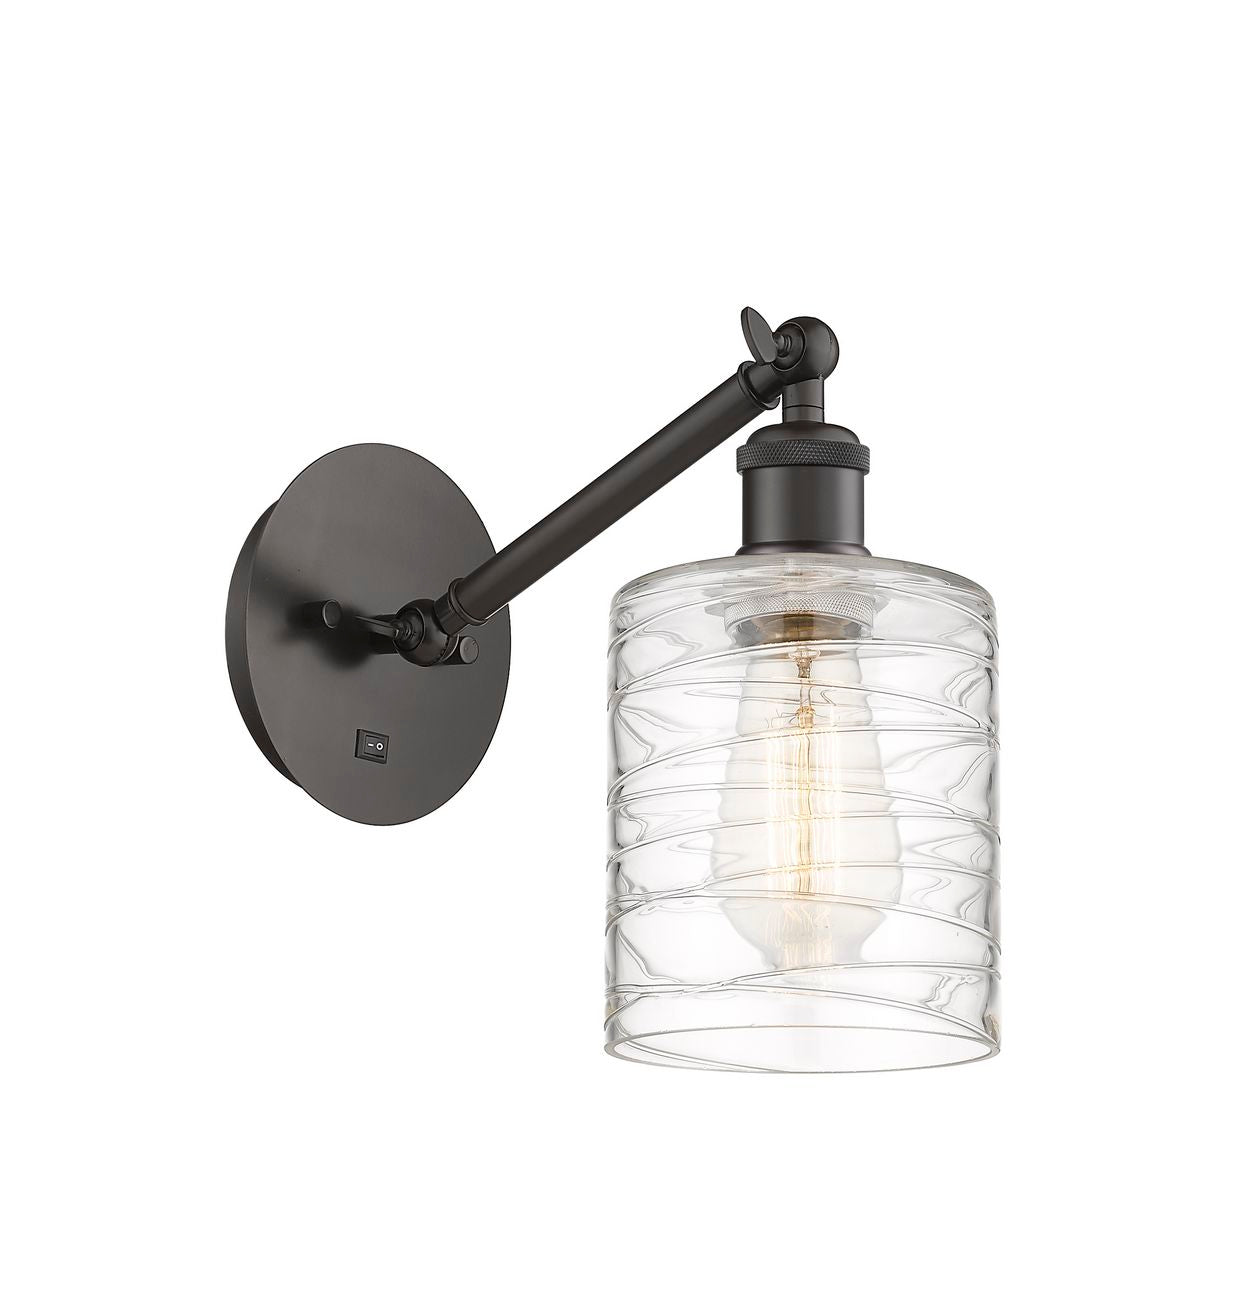 317-1W-OB-G1113 1-Light 5.3" Oil Rubbed Bronze Sconce - Deco Swirl Cobbleskill Glass - LED Bulb - Dimmensions: 5.3 x 12.5 x 12.75 - Glass Up or Down: Yes